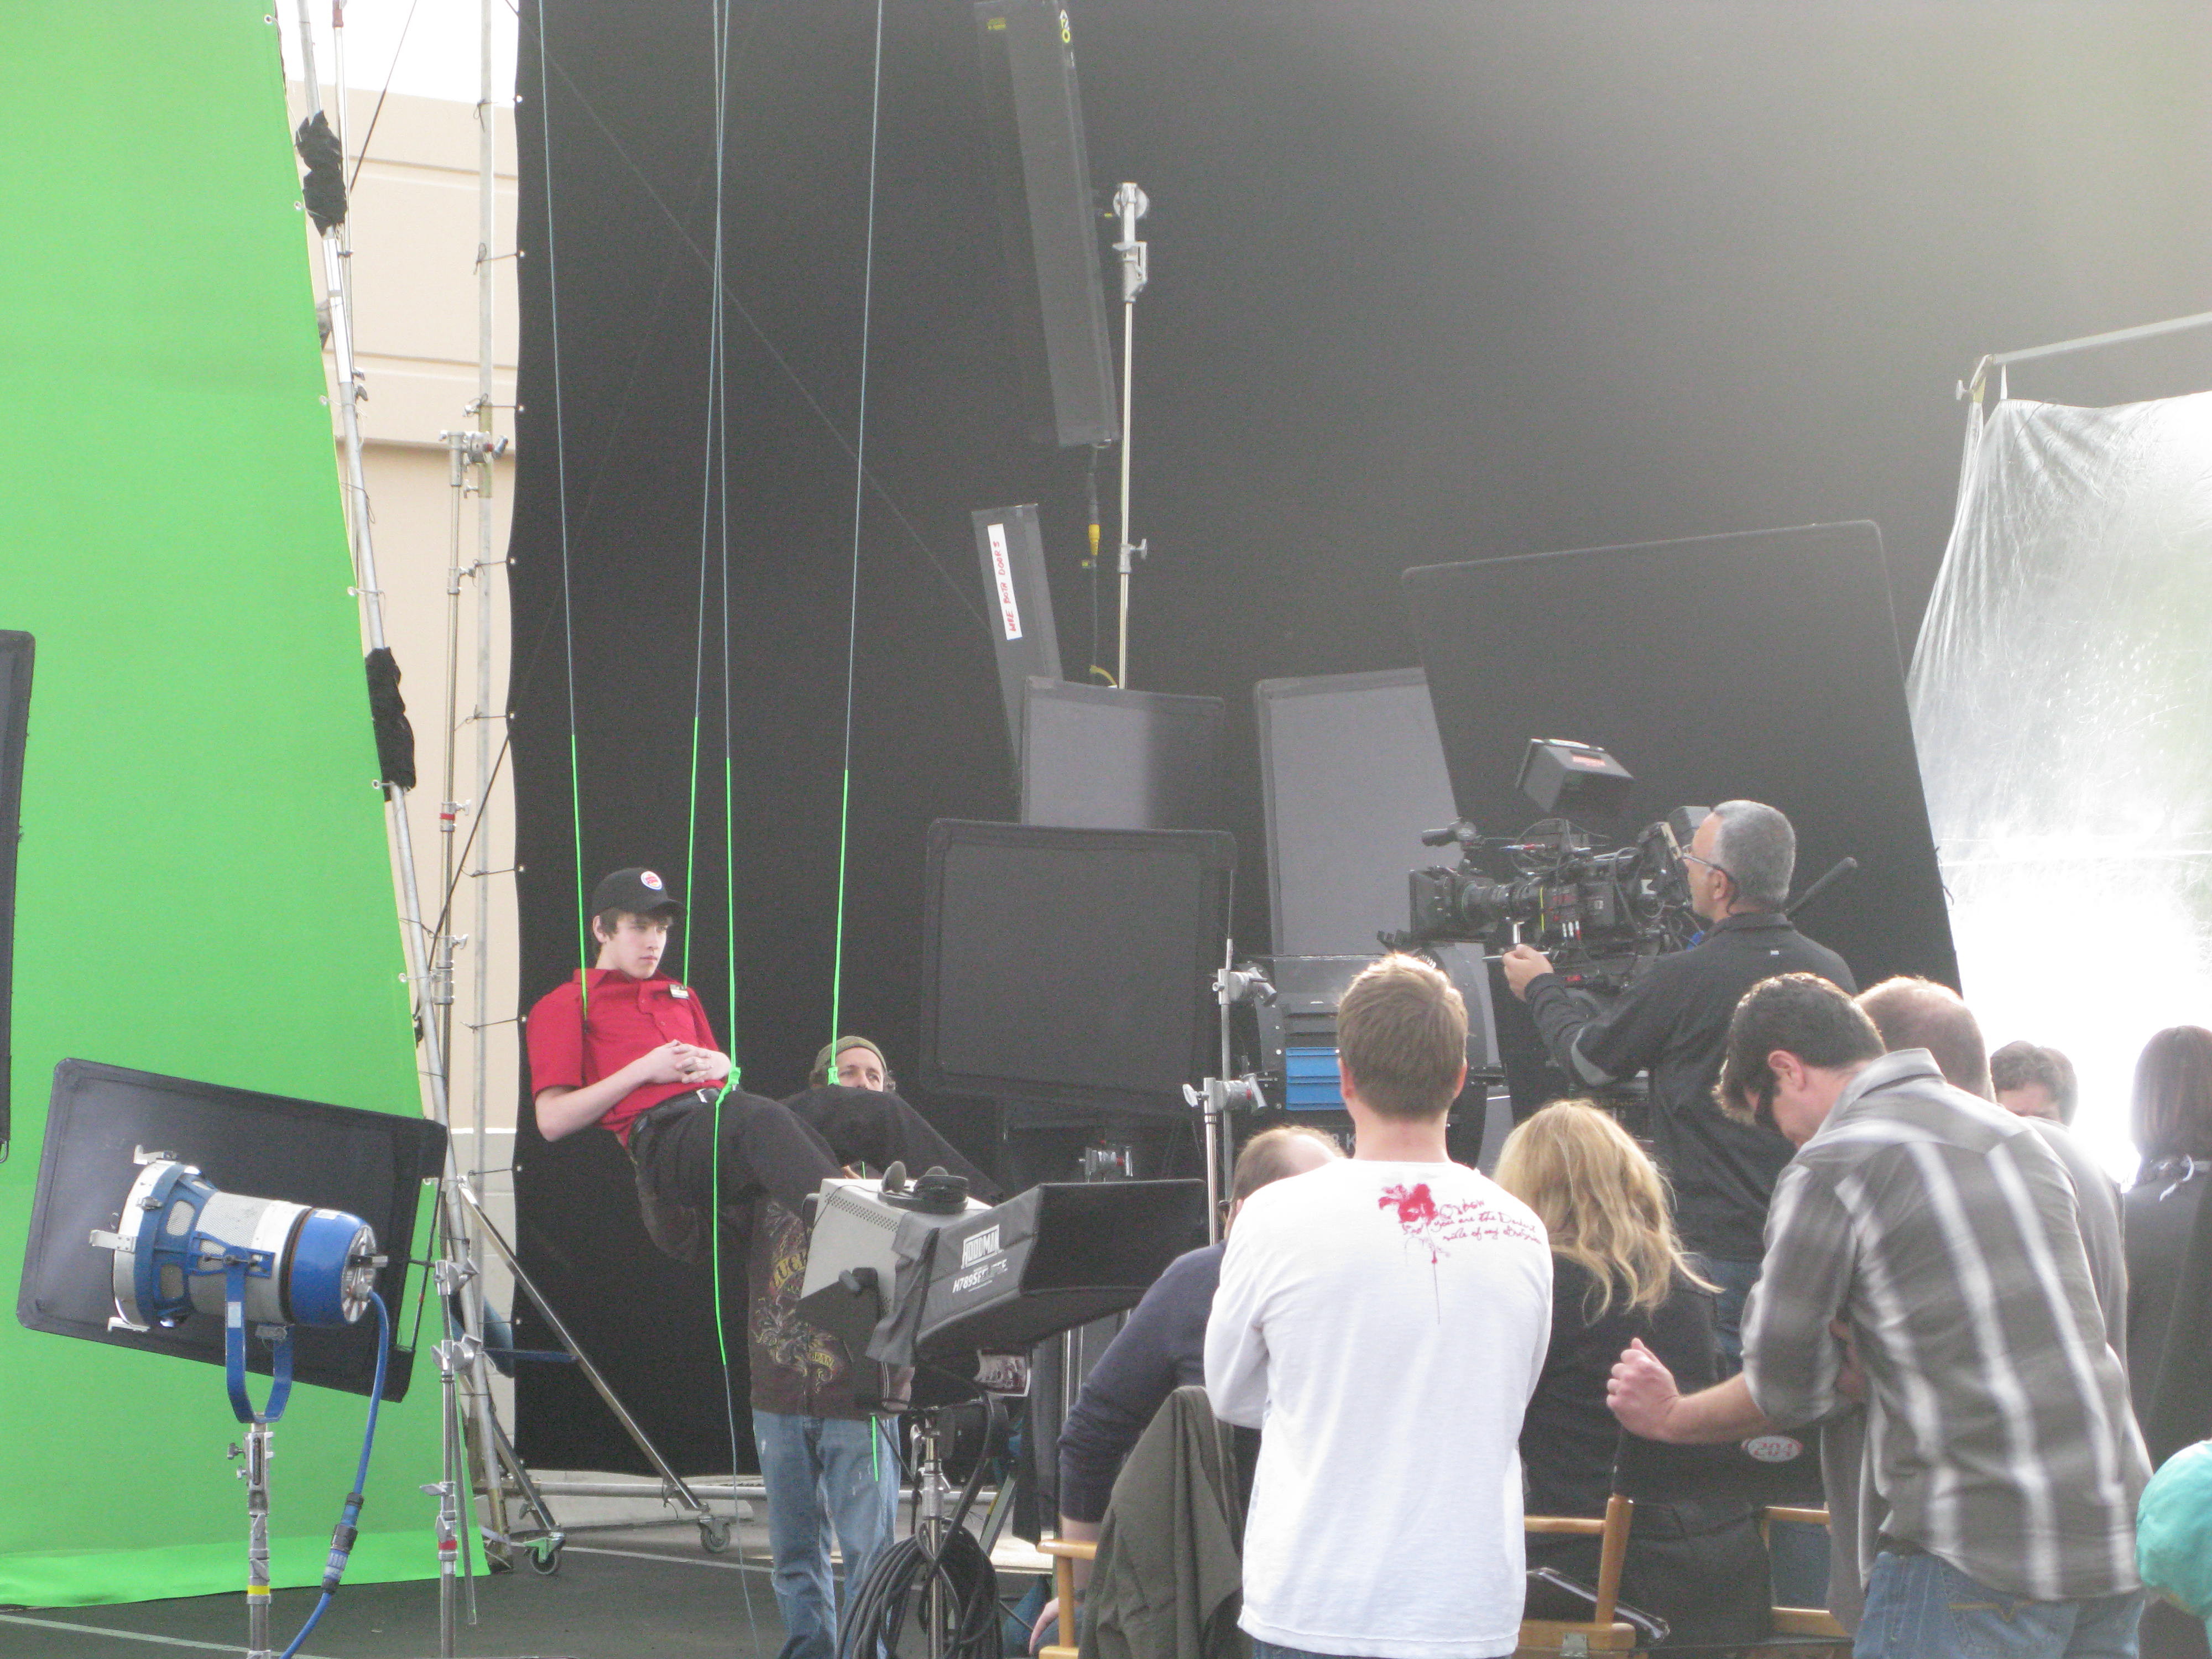 Shooting in front of the green screen.